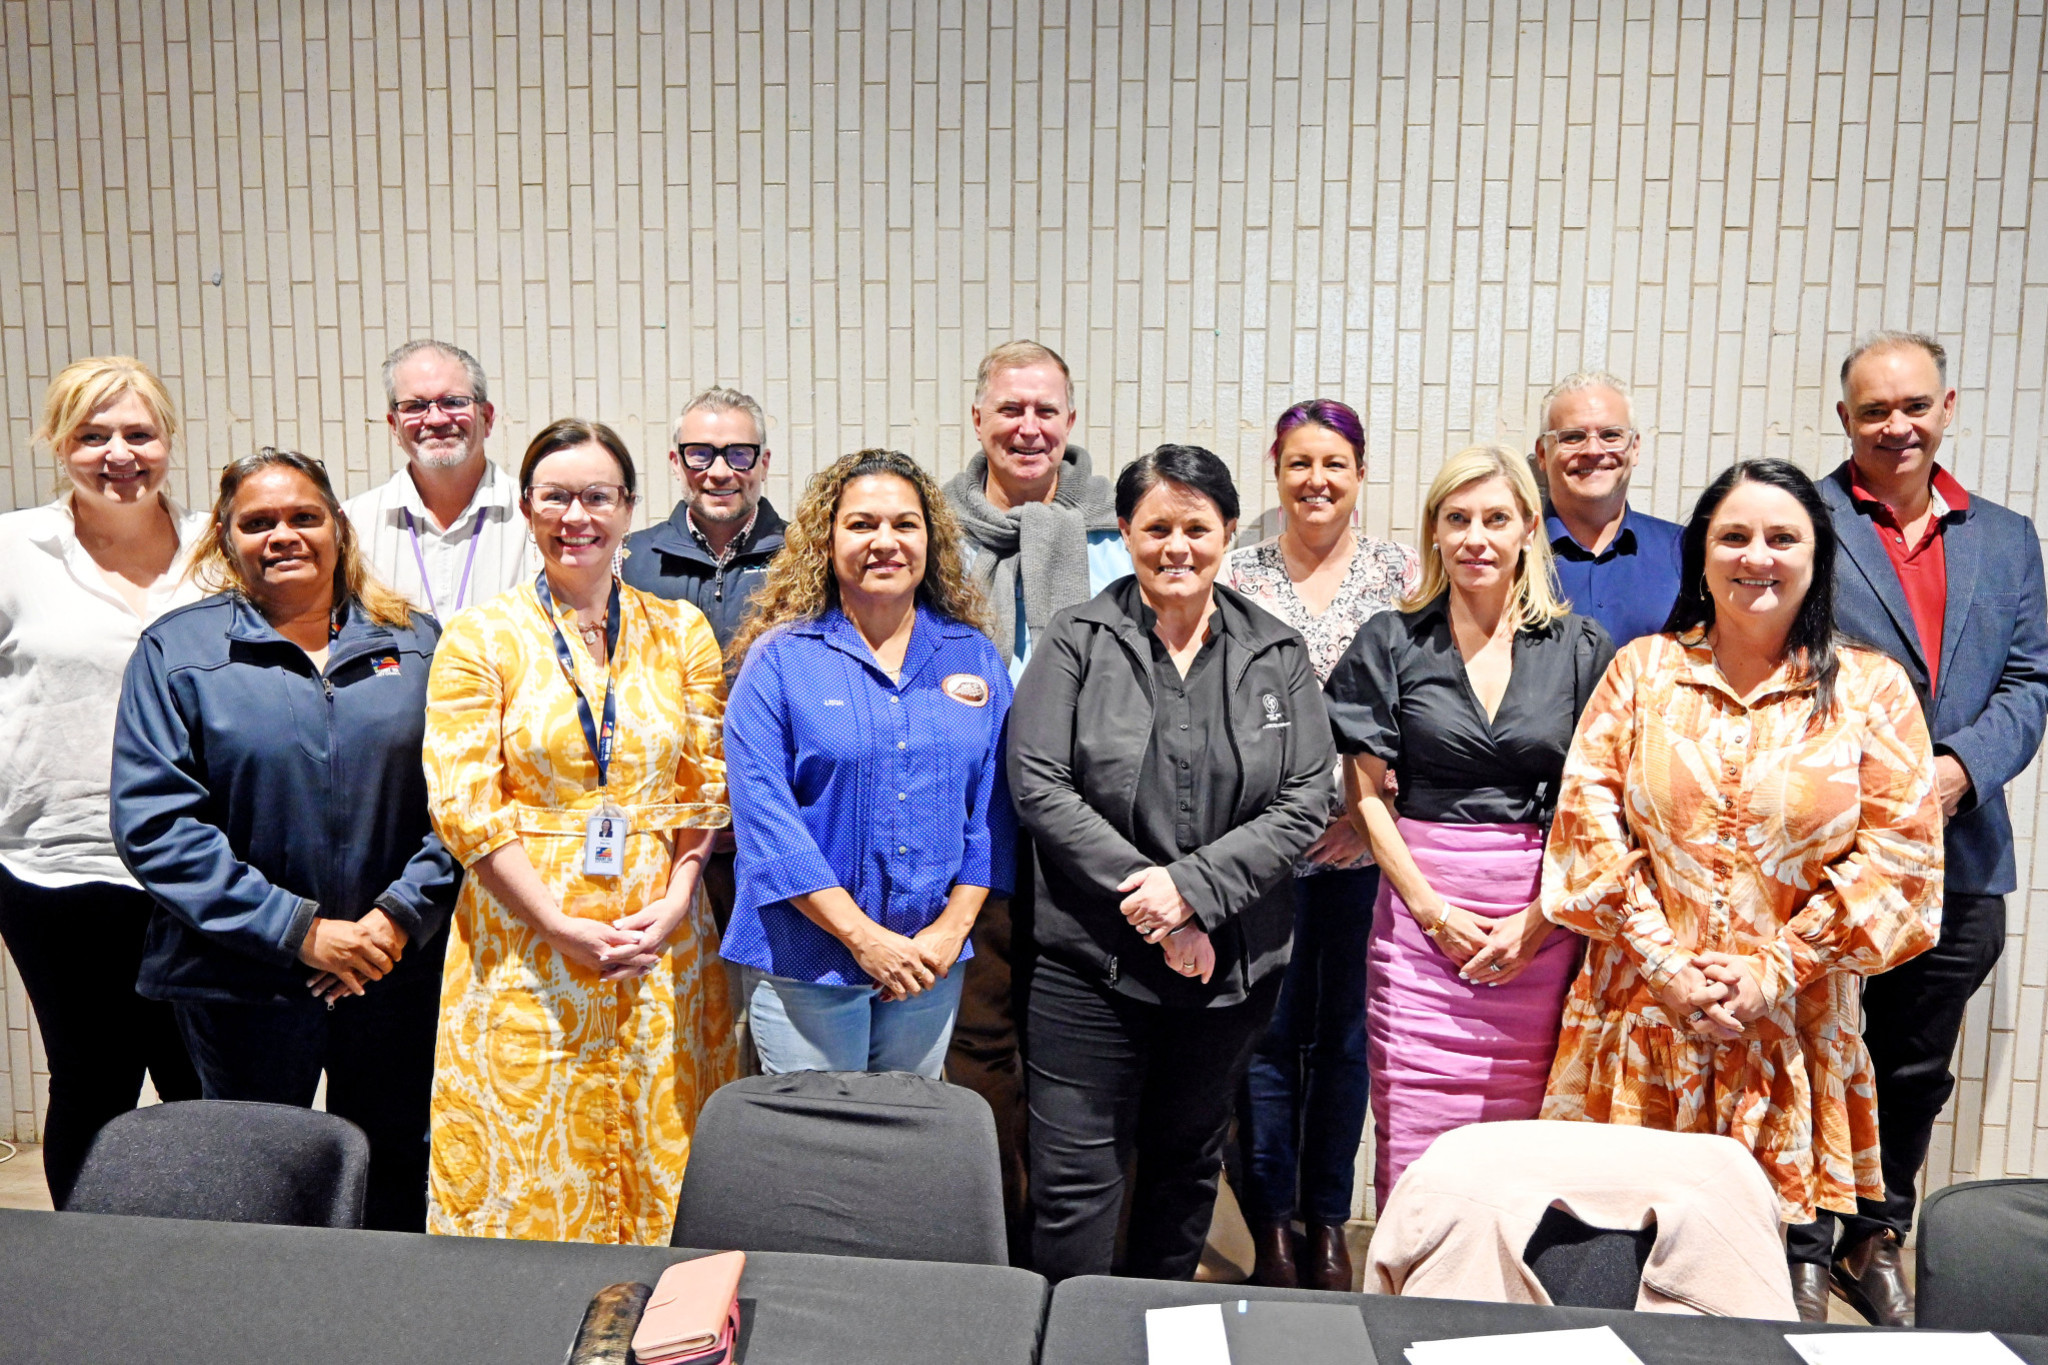 Mount Isa leaders and key stakeholders gathered last week for the third Mount Isa & Region Futures Advisory Committee meeting.